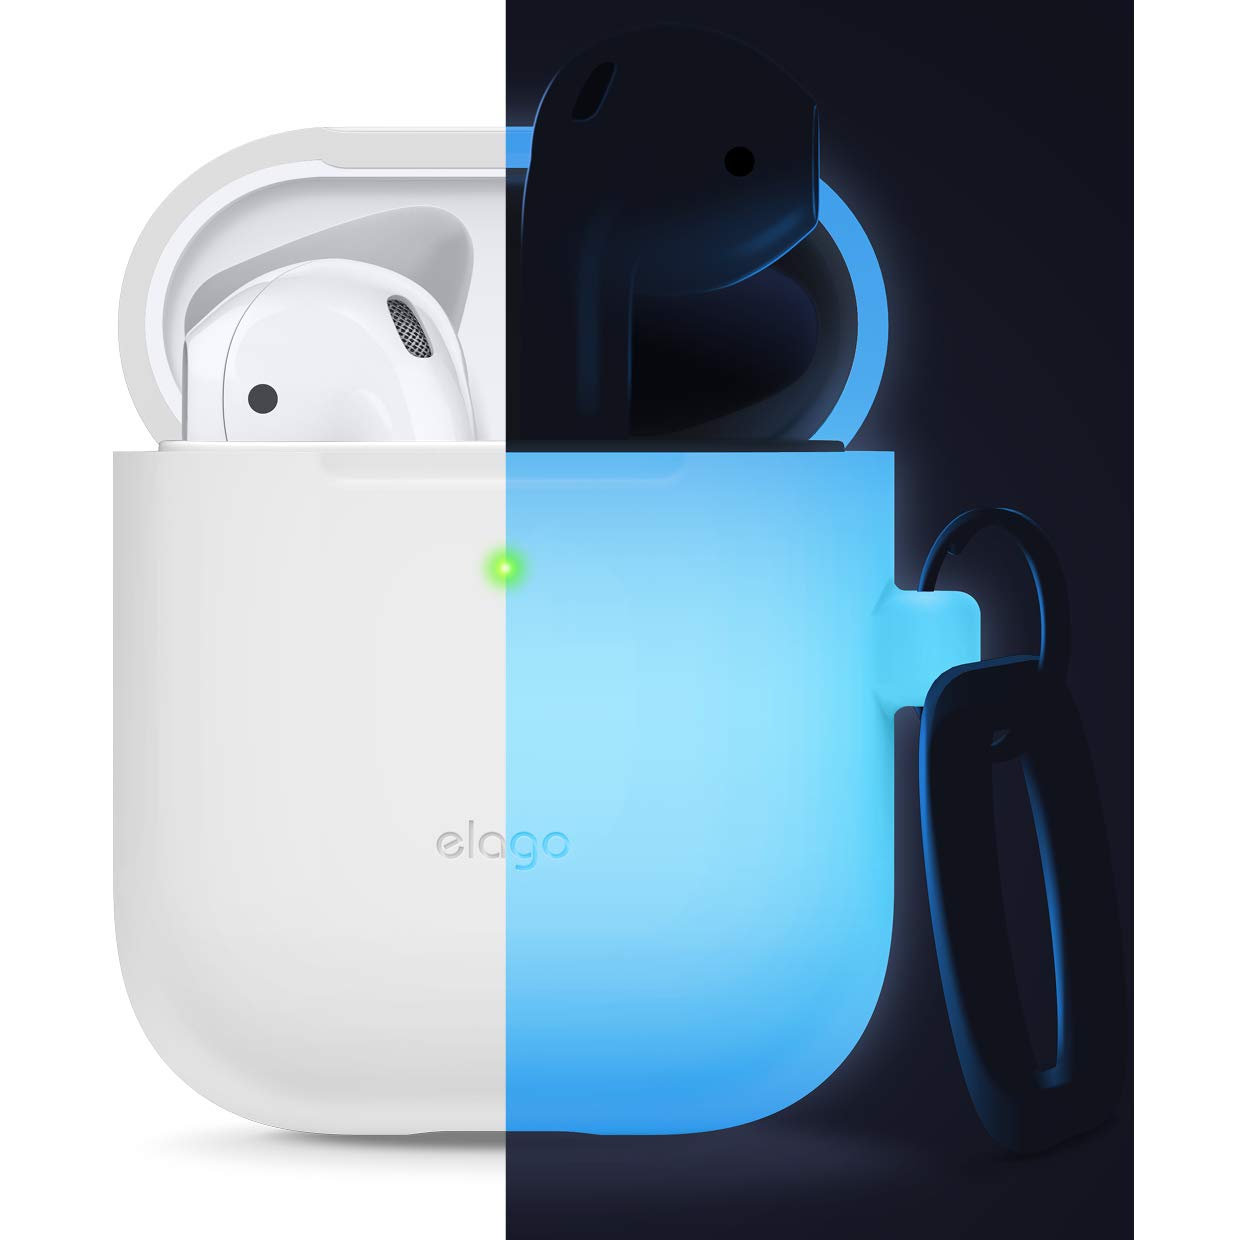 elago AirPods Ή P[X Jri t VR  Vv fUC Jo[ ϏՌ h~ h~ ی ANZT[ [ AirPods1 / AirPods2 Wireless Charging Case GA[|bY Ή ] HANG CASE iCg~iXiFj